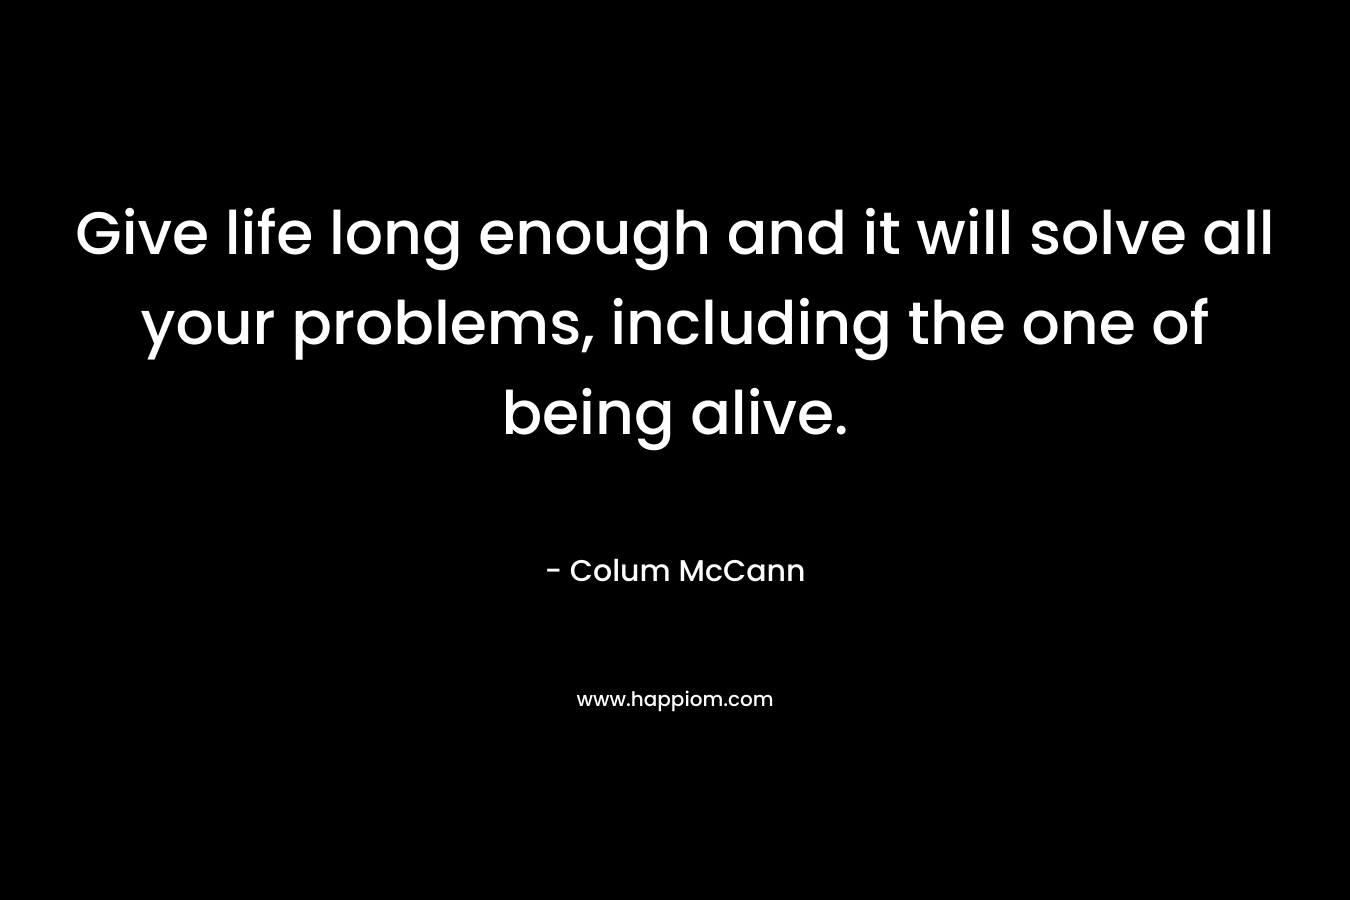 Give life long enough and it will solve all your problems, including the one of being alive. – Colum McCann